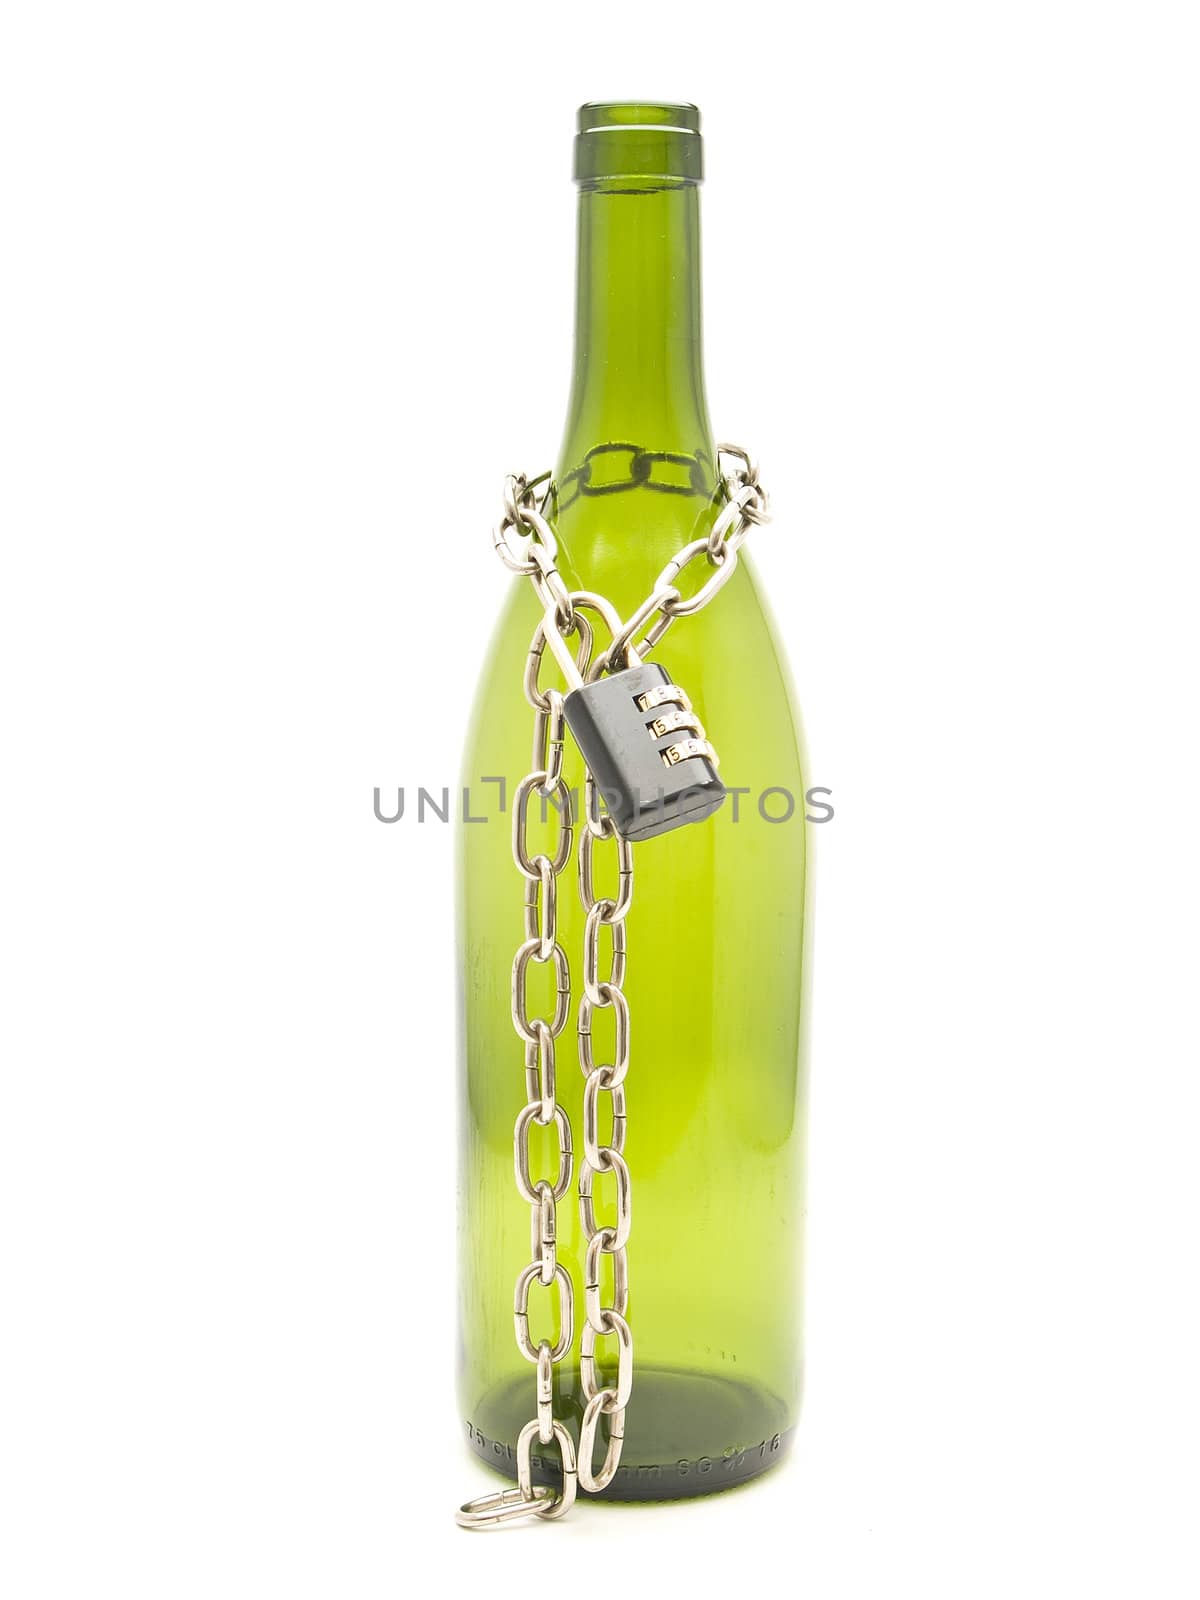 	
bottle chained